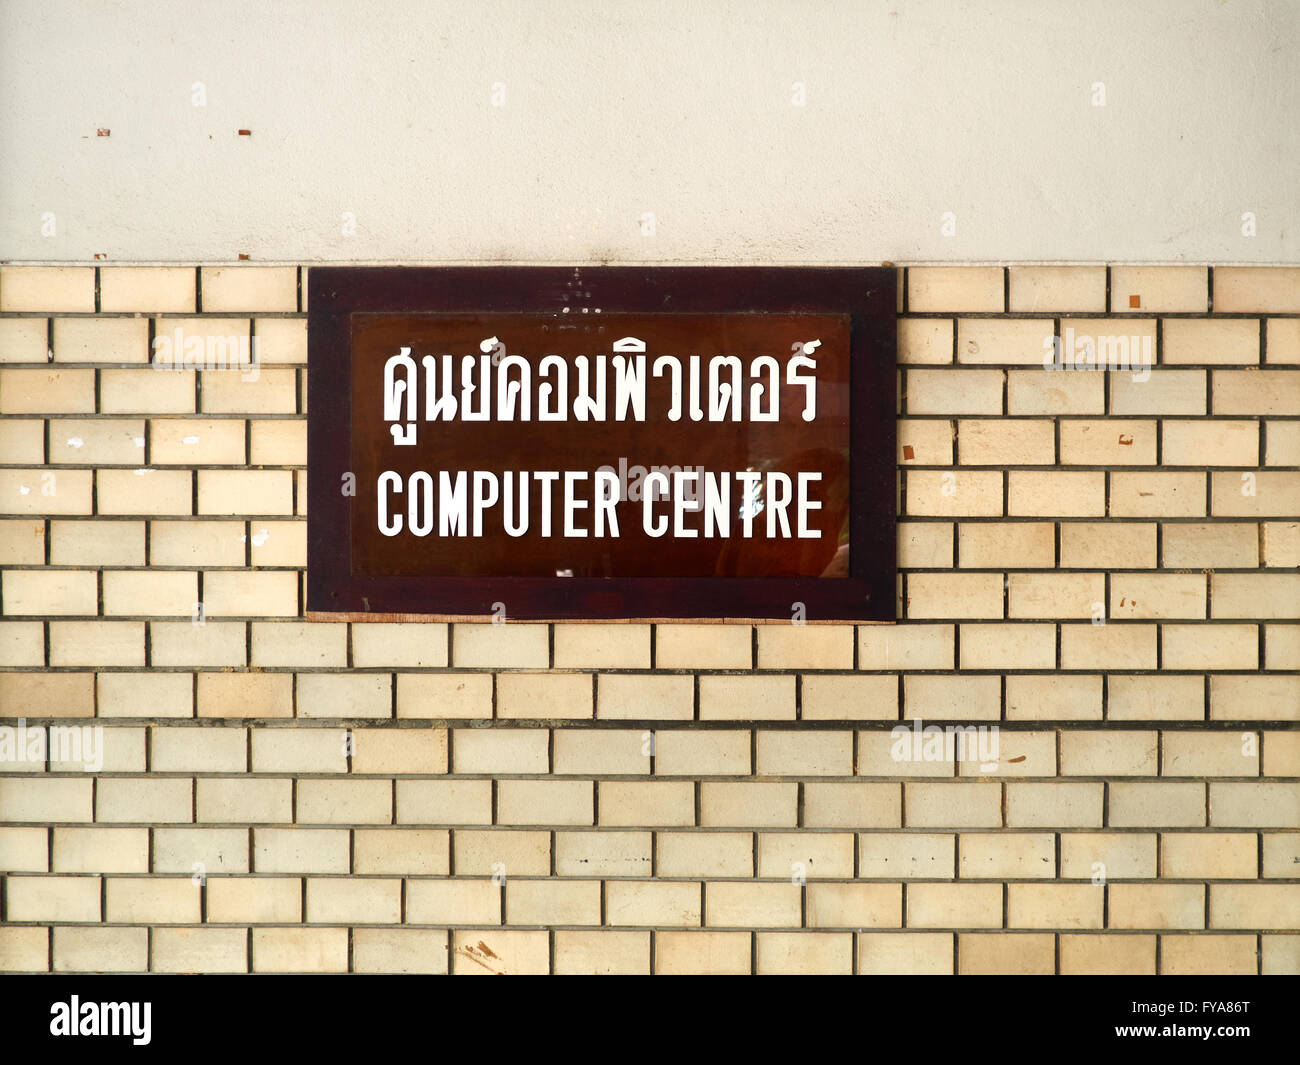 A brown computer centre sign mounted on a brick pattern wall. Stock Photo